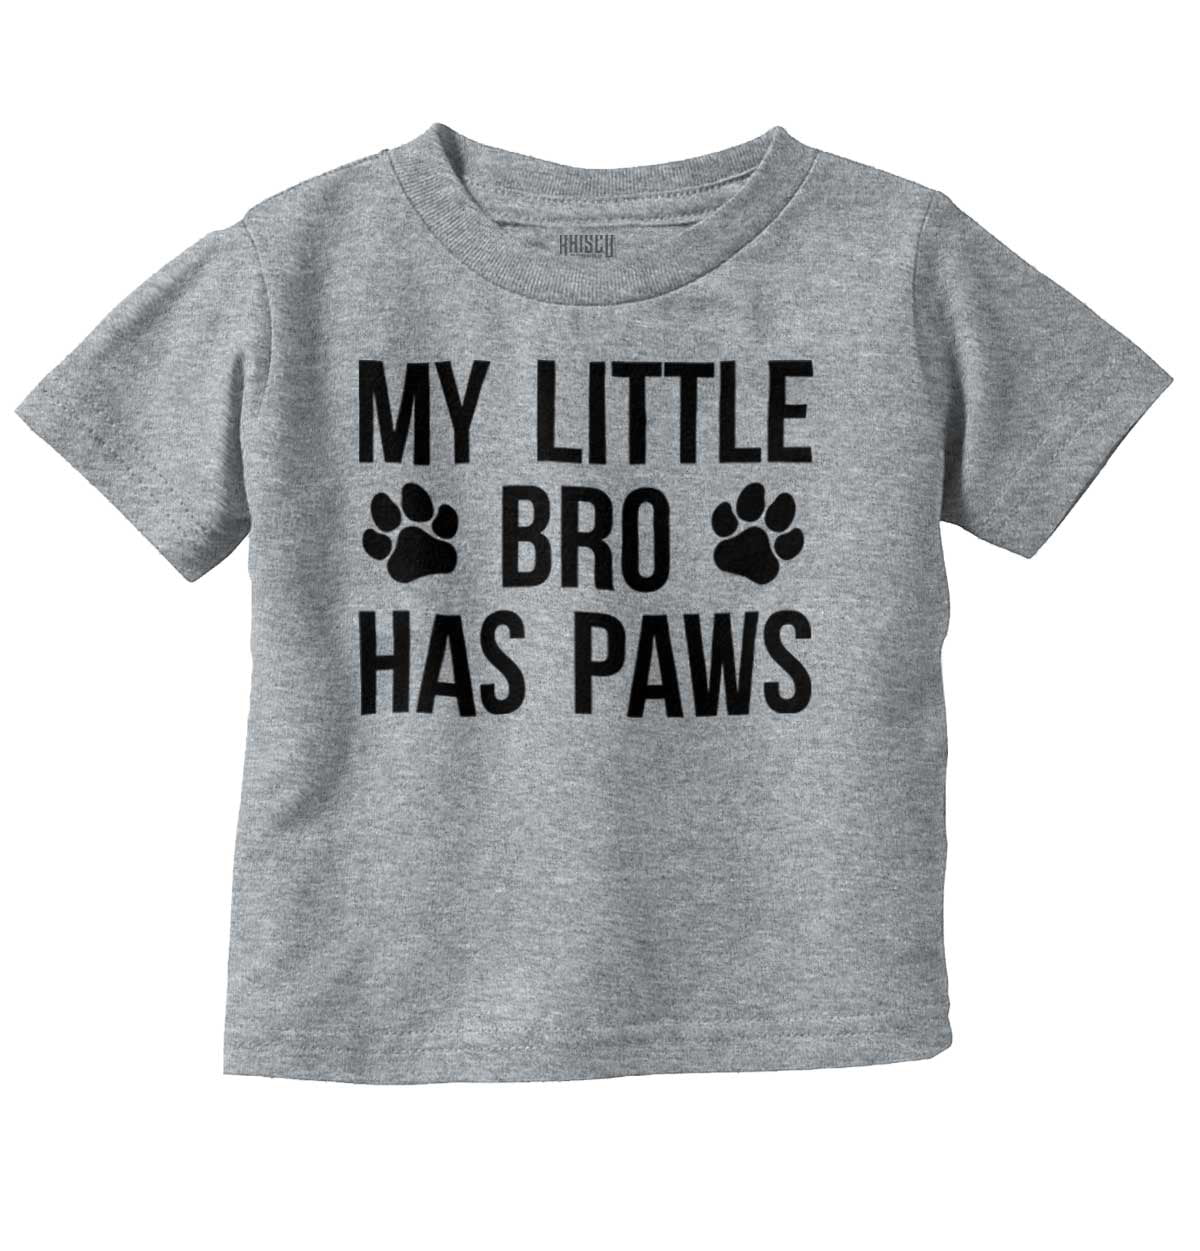 Big Sister Has Paws Dog Lover Cat Owner Pet Unisex Toddler Kids Youth T Shirt 